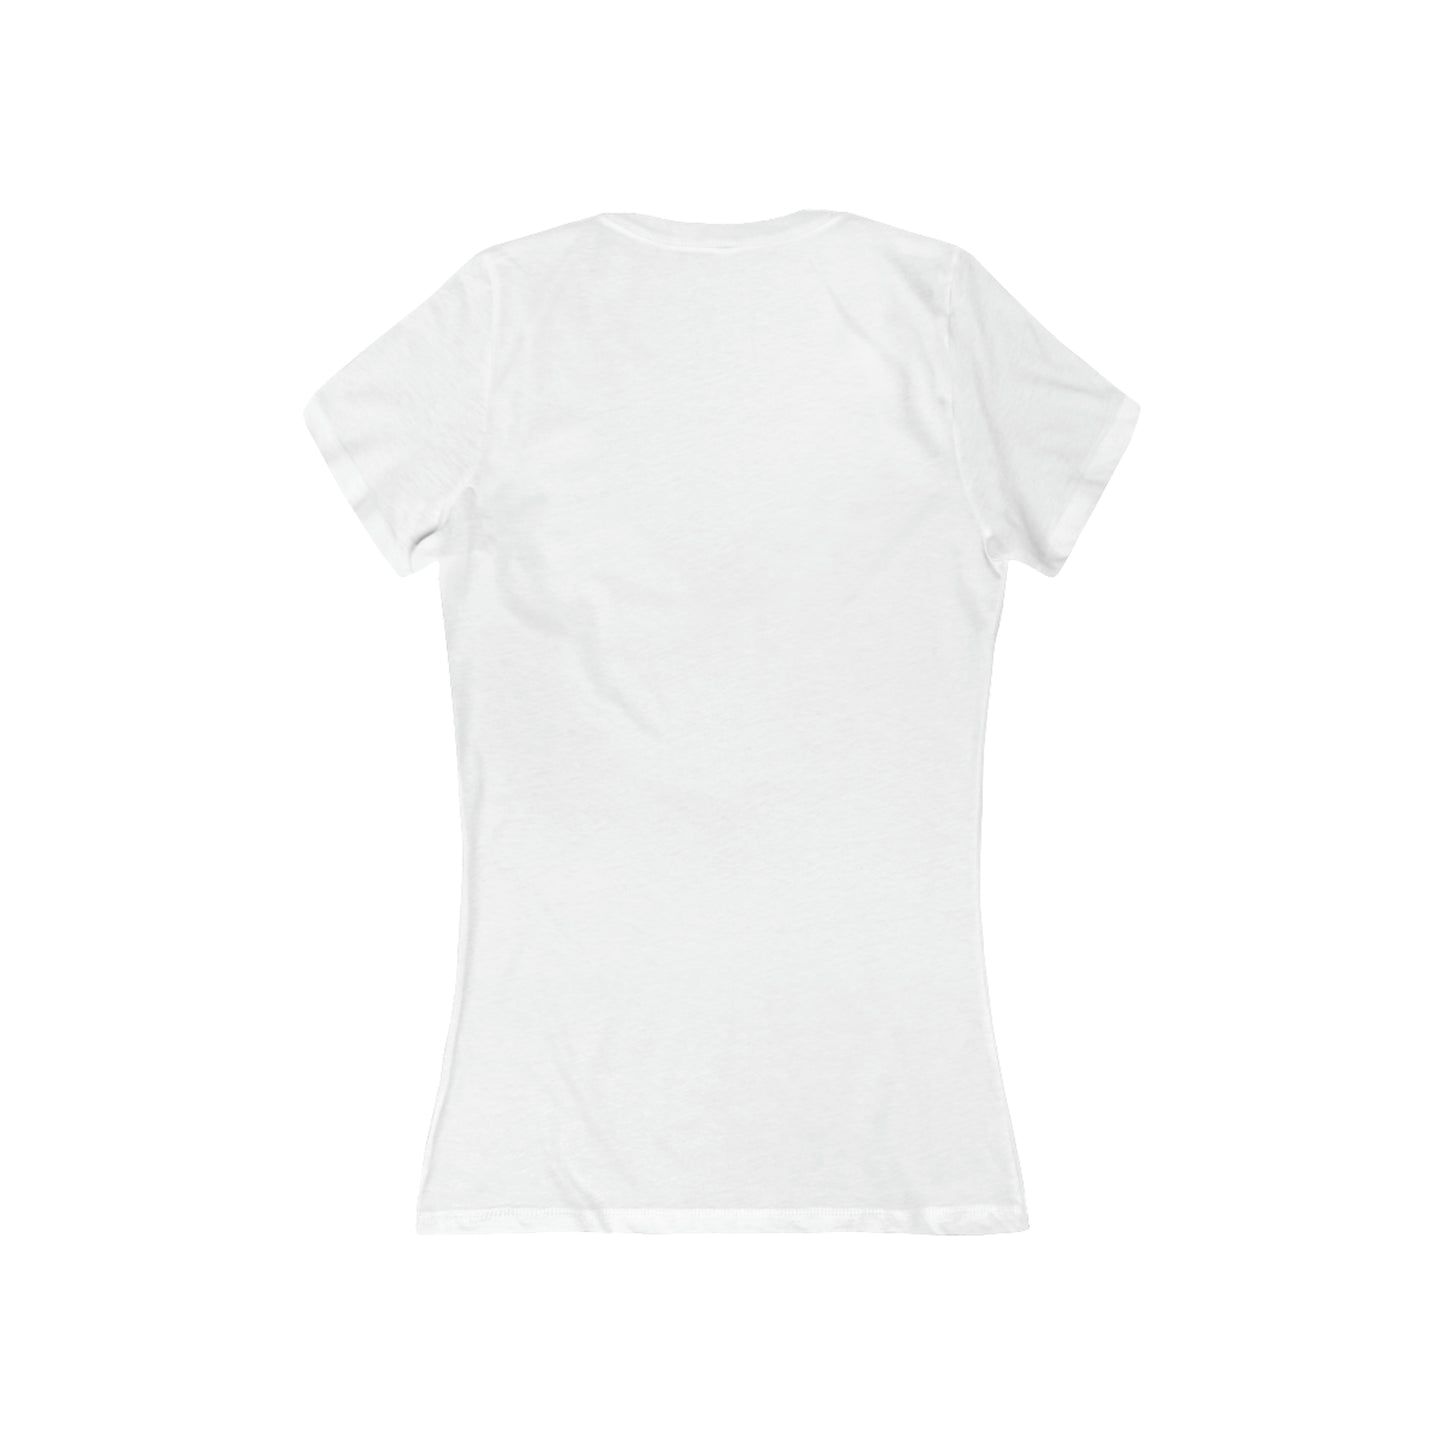 (UK) DAY X IS HERE Women's V neck Softstyle T-Shirt